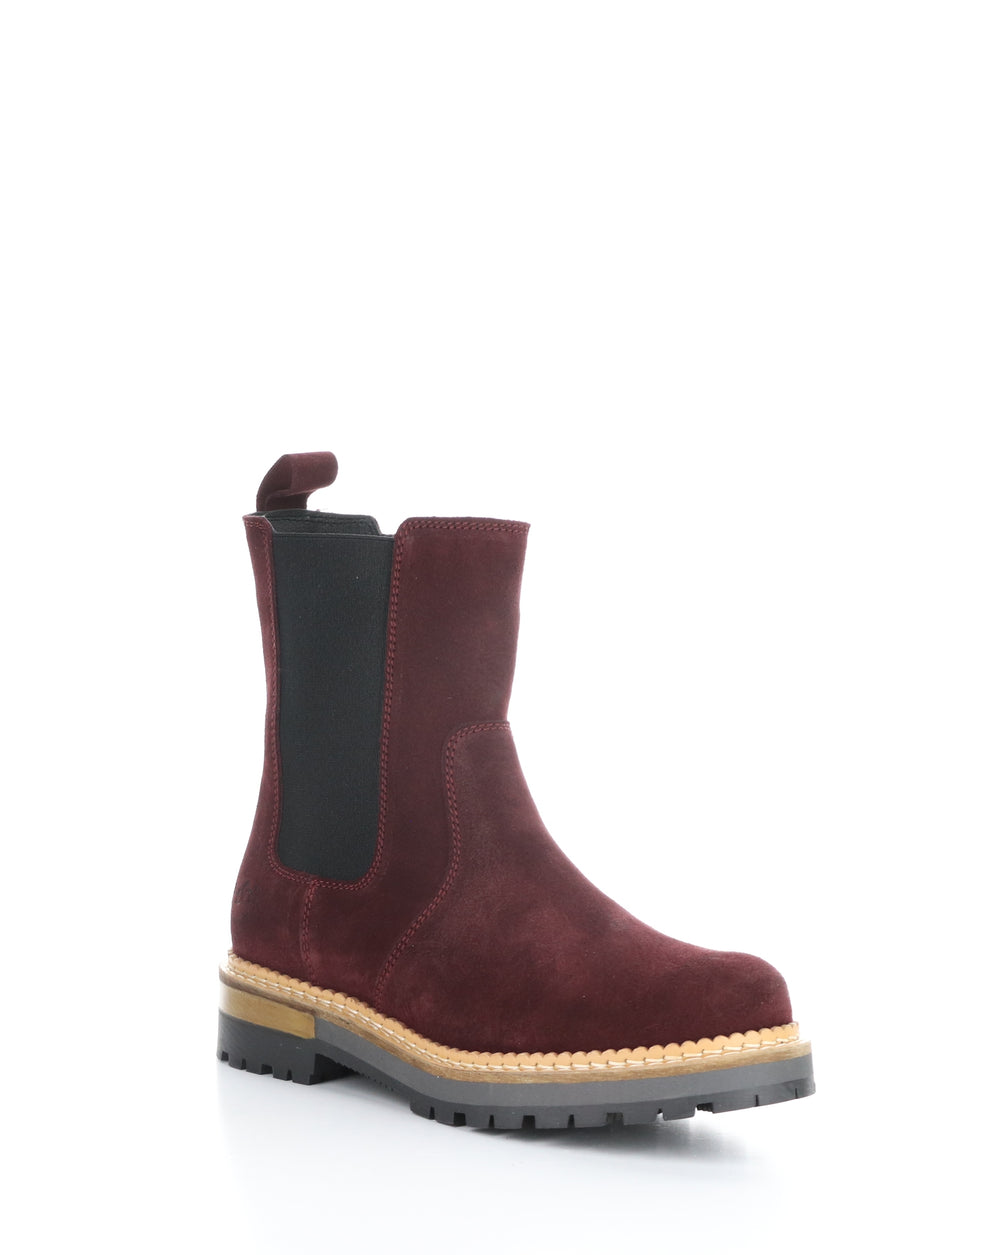 ARBOR MULBERRY Elasticated Boots